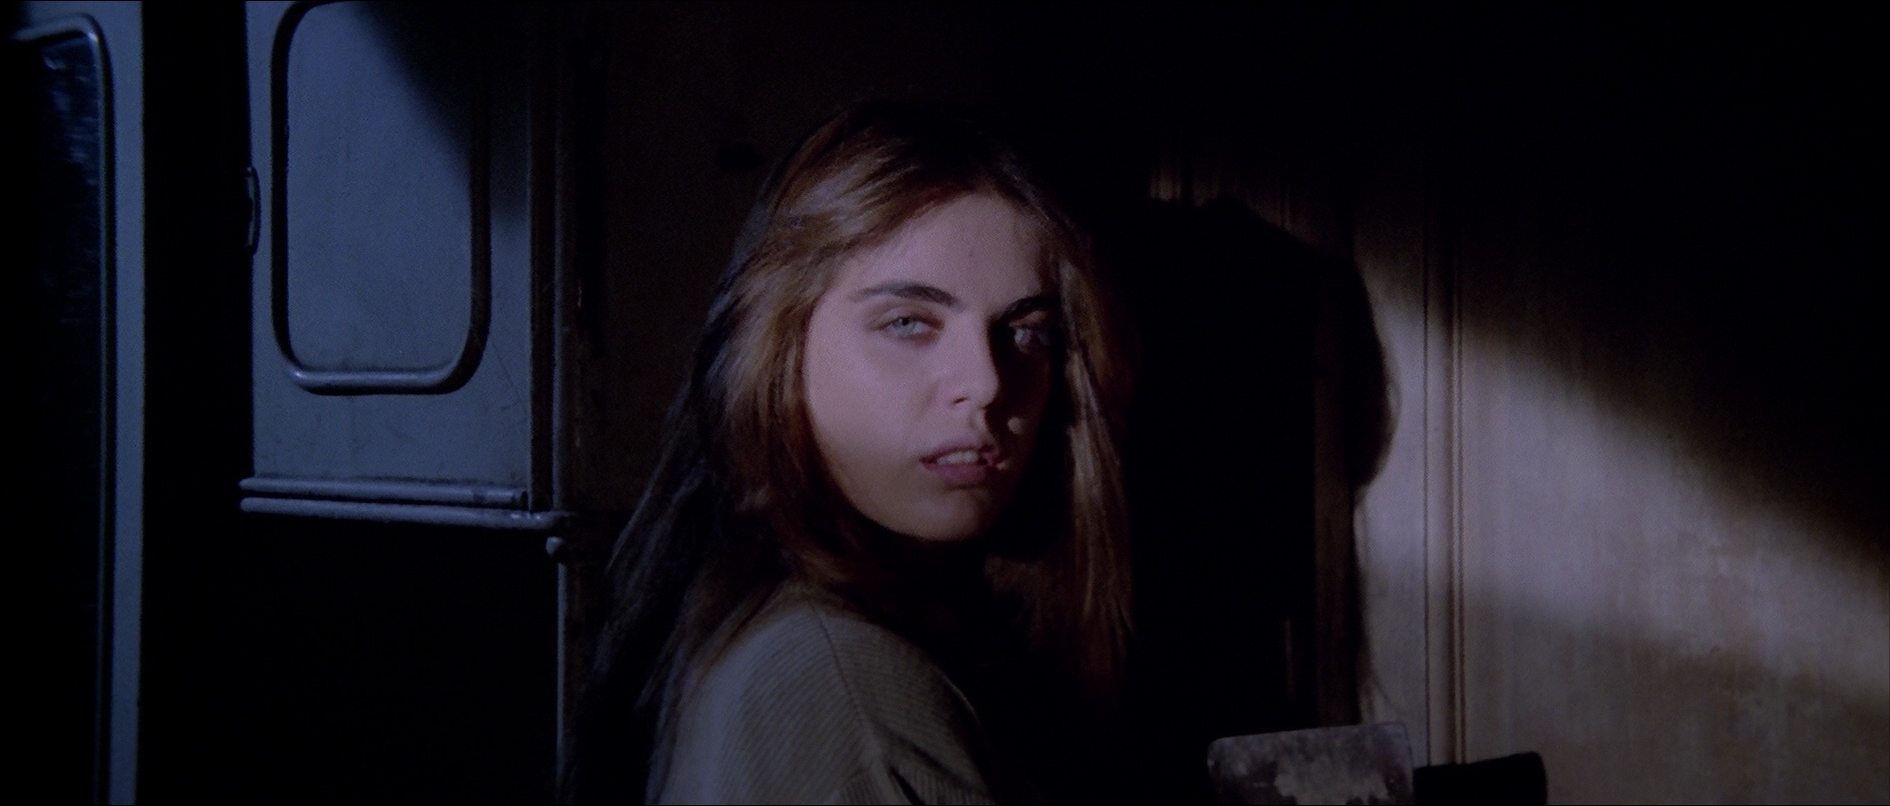 http://sinsofcinema.com/Images/House%20by%20the%20Cemetery/House%20by%20the%20Cemetery%20Blu-Ray.jpg